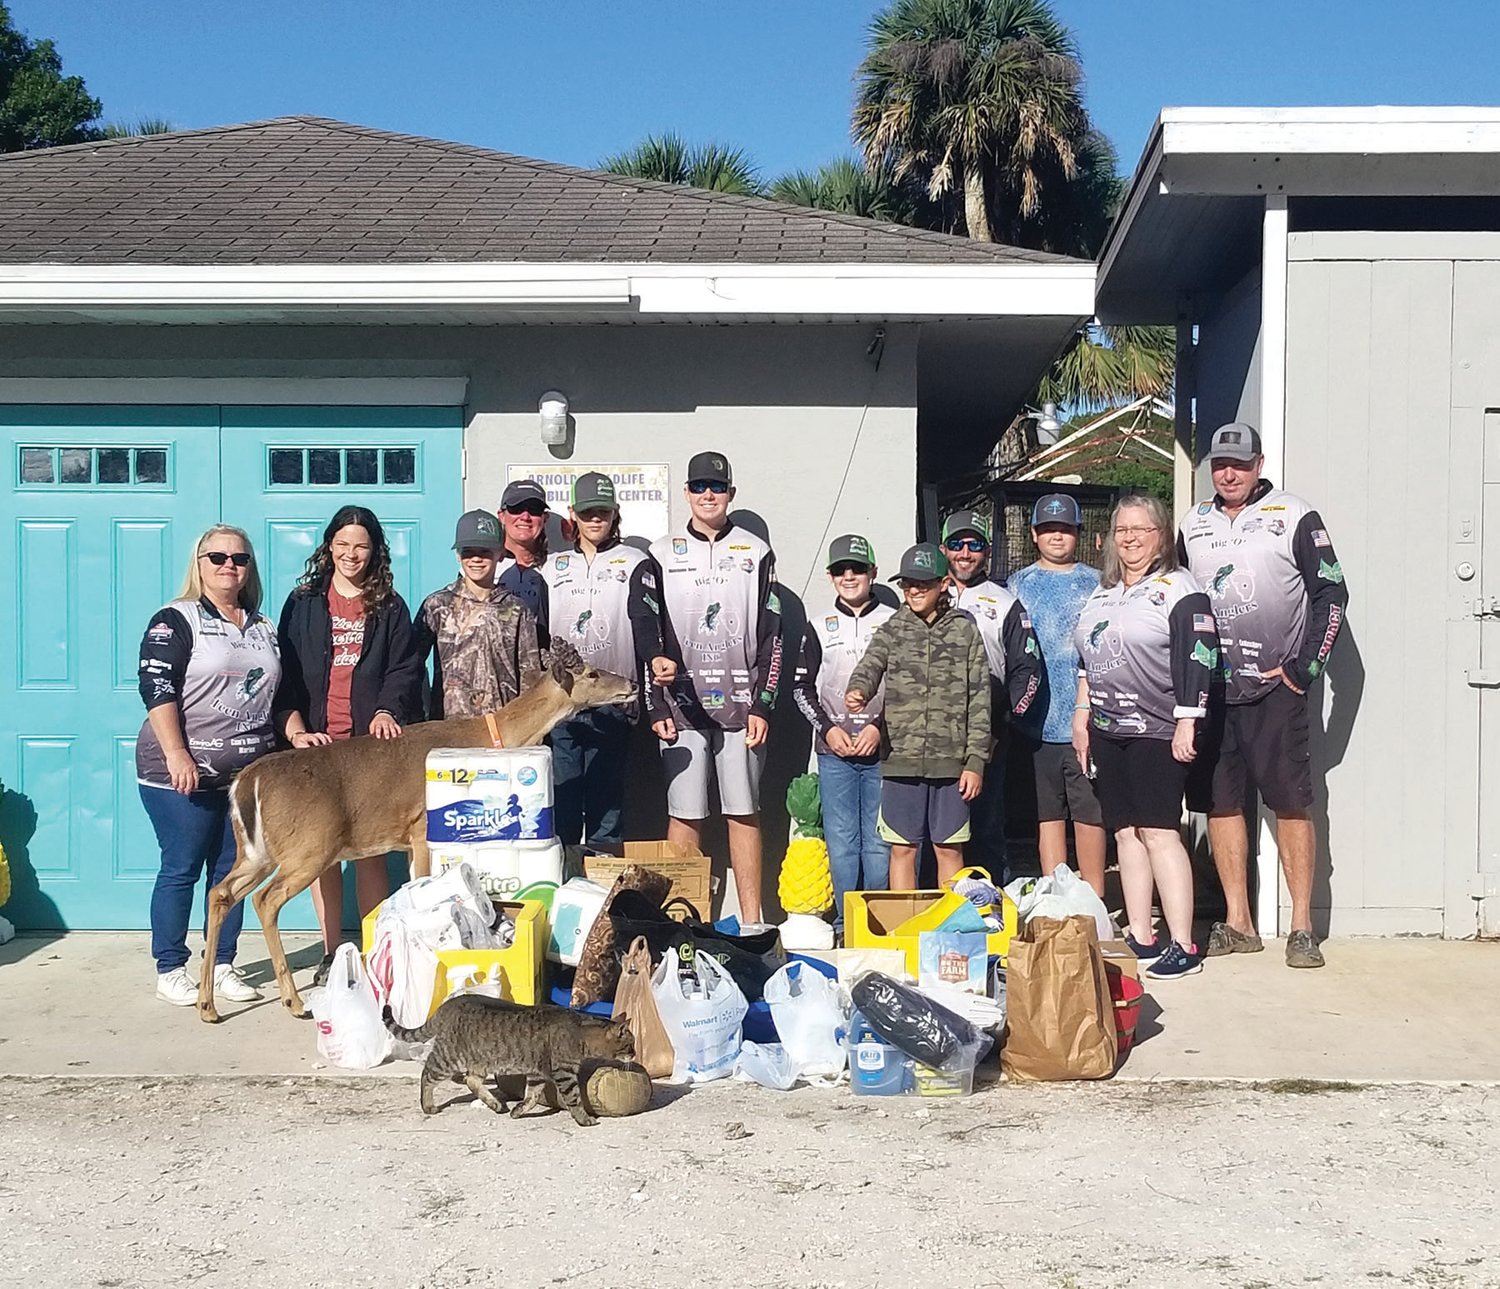 Big O Teen Anglers chose Arnold’s Wildlife where they presented towels, cleaners, crates, paper goods, food supplies, garbage bags and so much more. Pictured Left to right: Danielle DeWitt, Carli McPeak, Kylar Koedam, Dominik Steinmetz, Tanner Seabolt, Jacob Williams, Derrik Steinmetz, Marc Williams, Waylen McLean, Dora Seabolt & Terry Seabolt